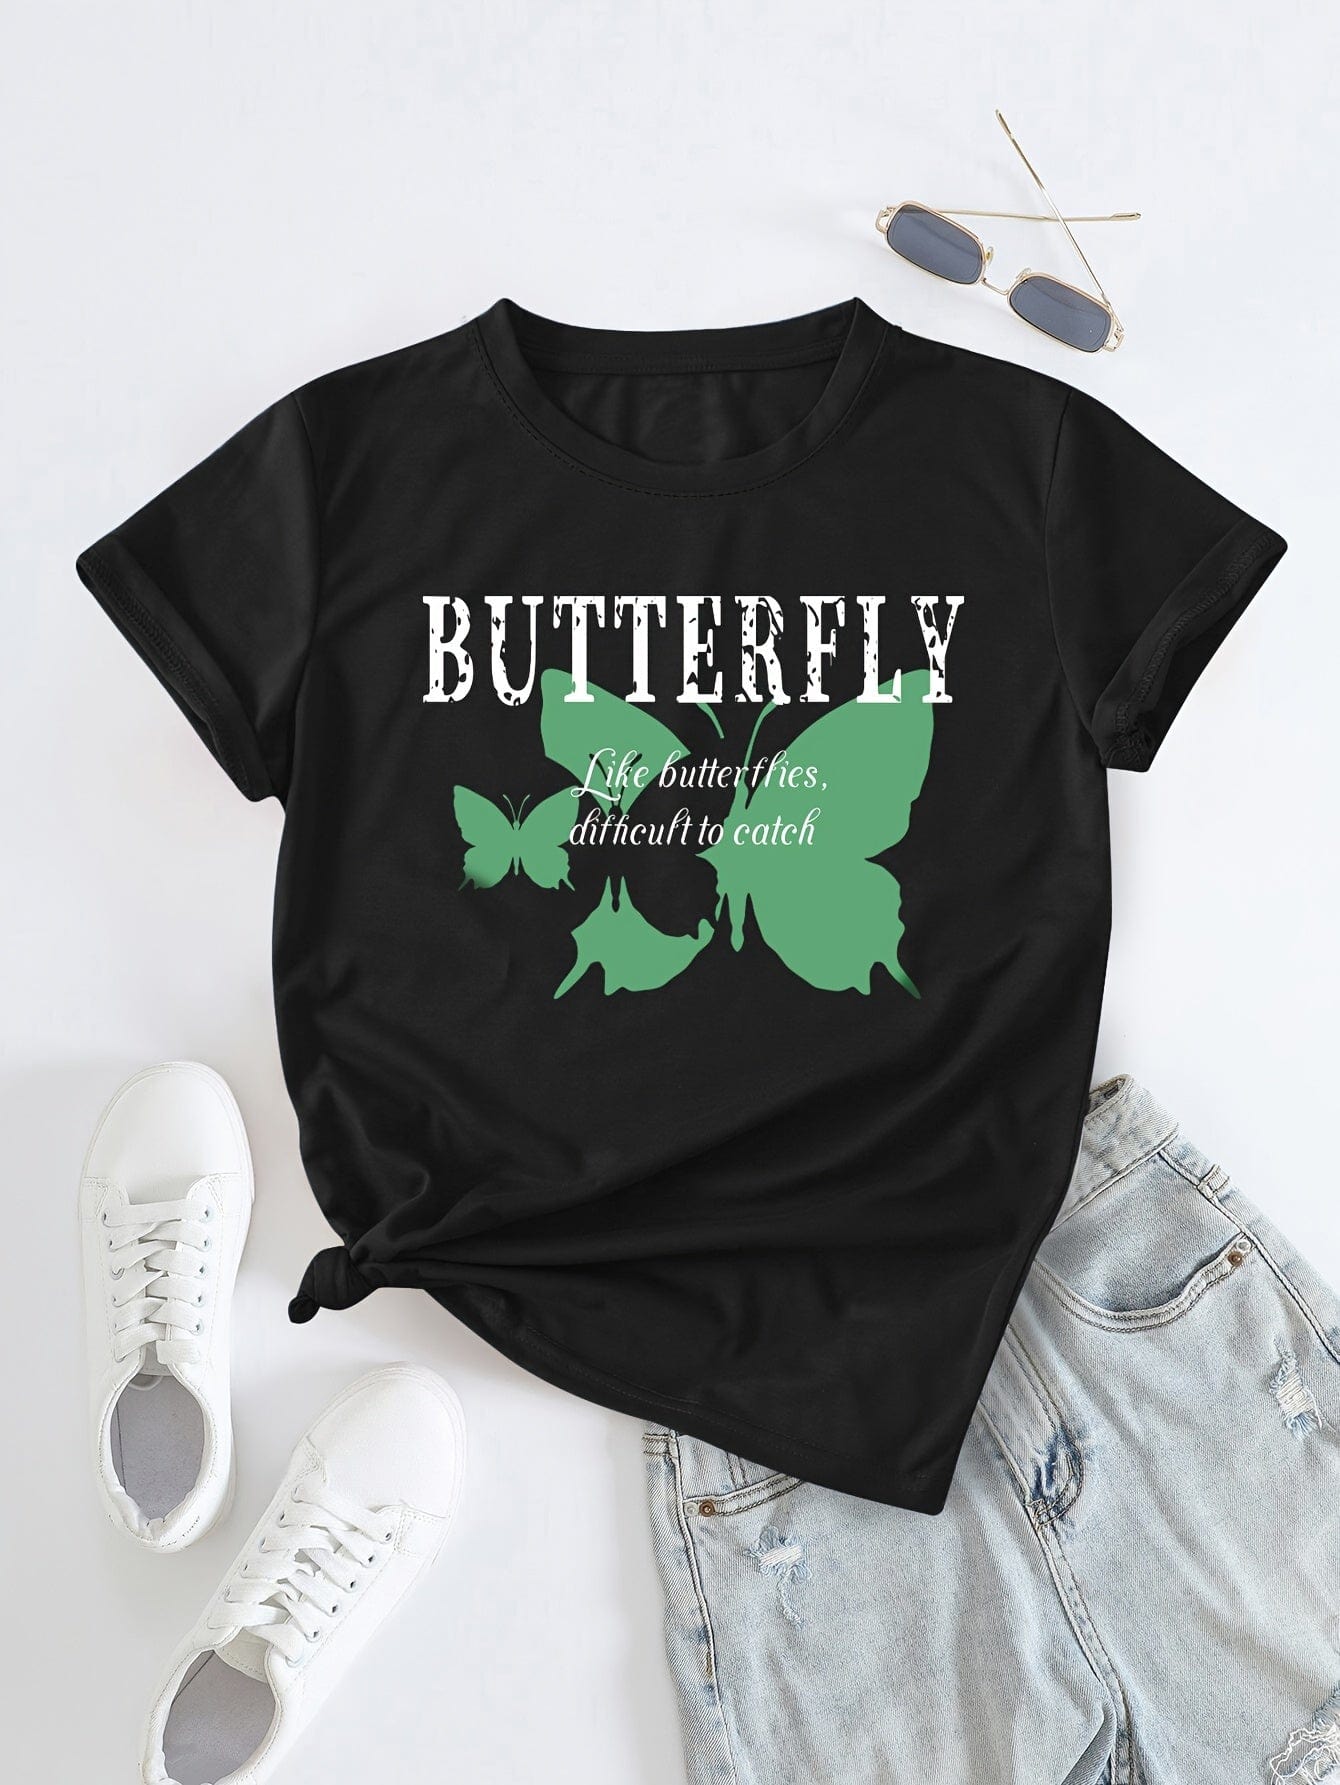 Butterfly Print Crew Neck T-shirt for Women - Spring & Summer Style Upgrade